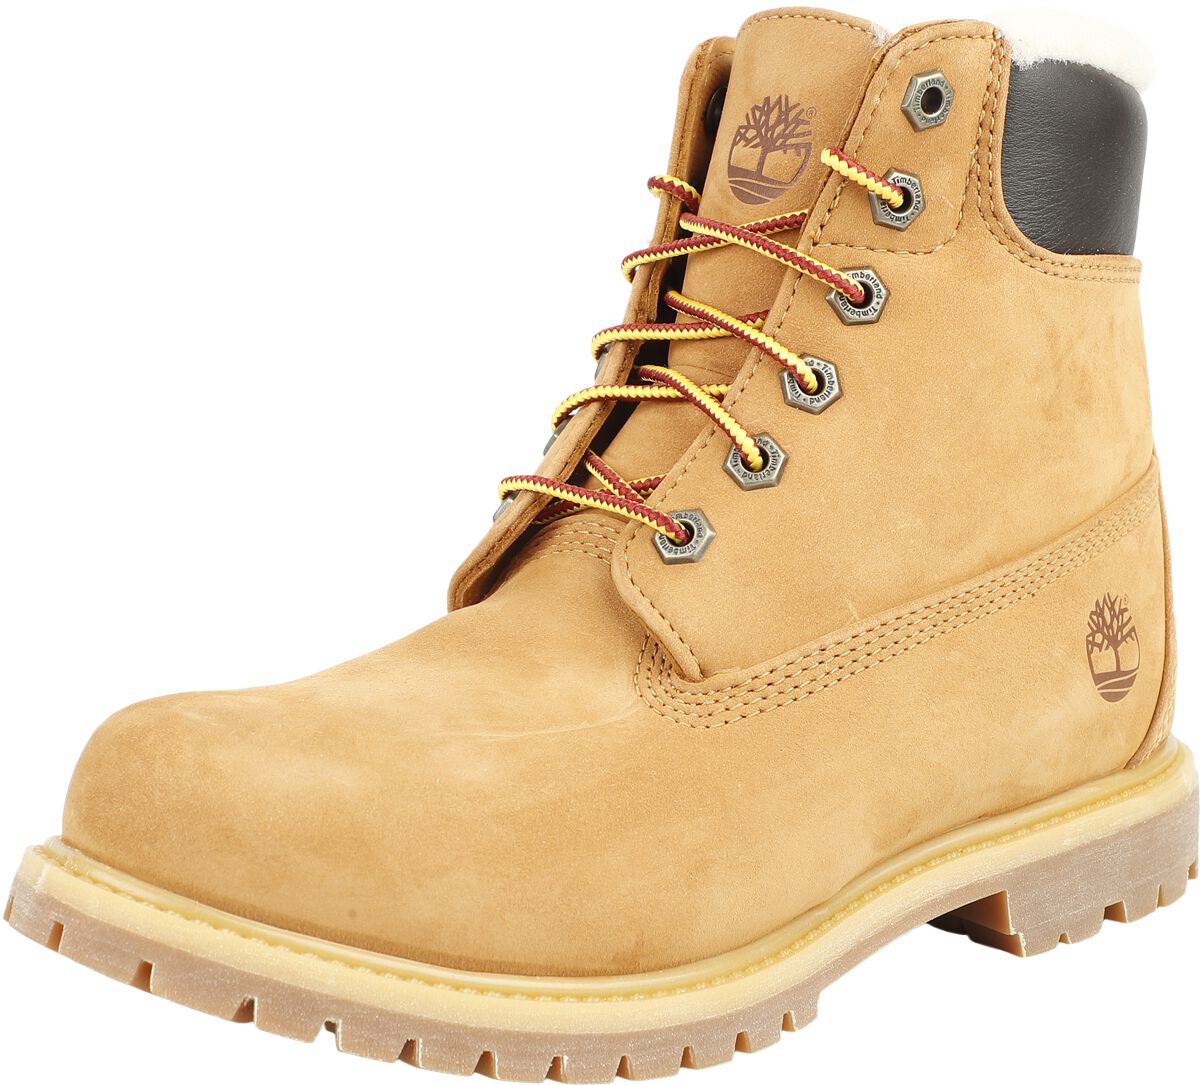 Timberland 6 Inch Premium Shearling Lined WP Boot Boot braun in EU40